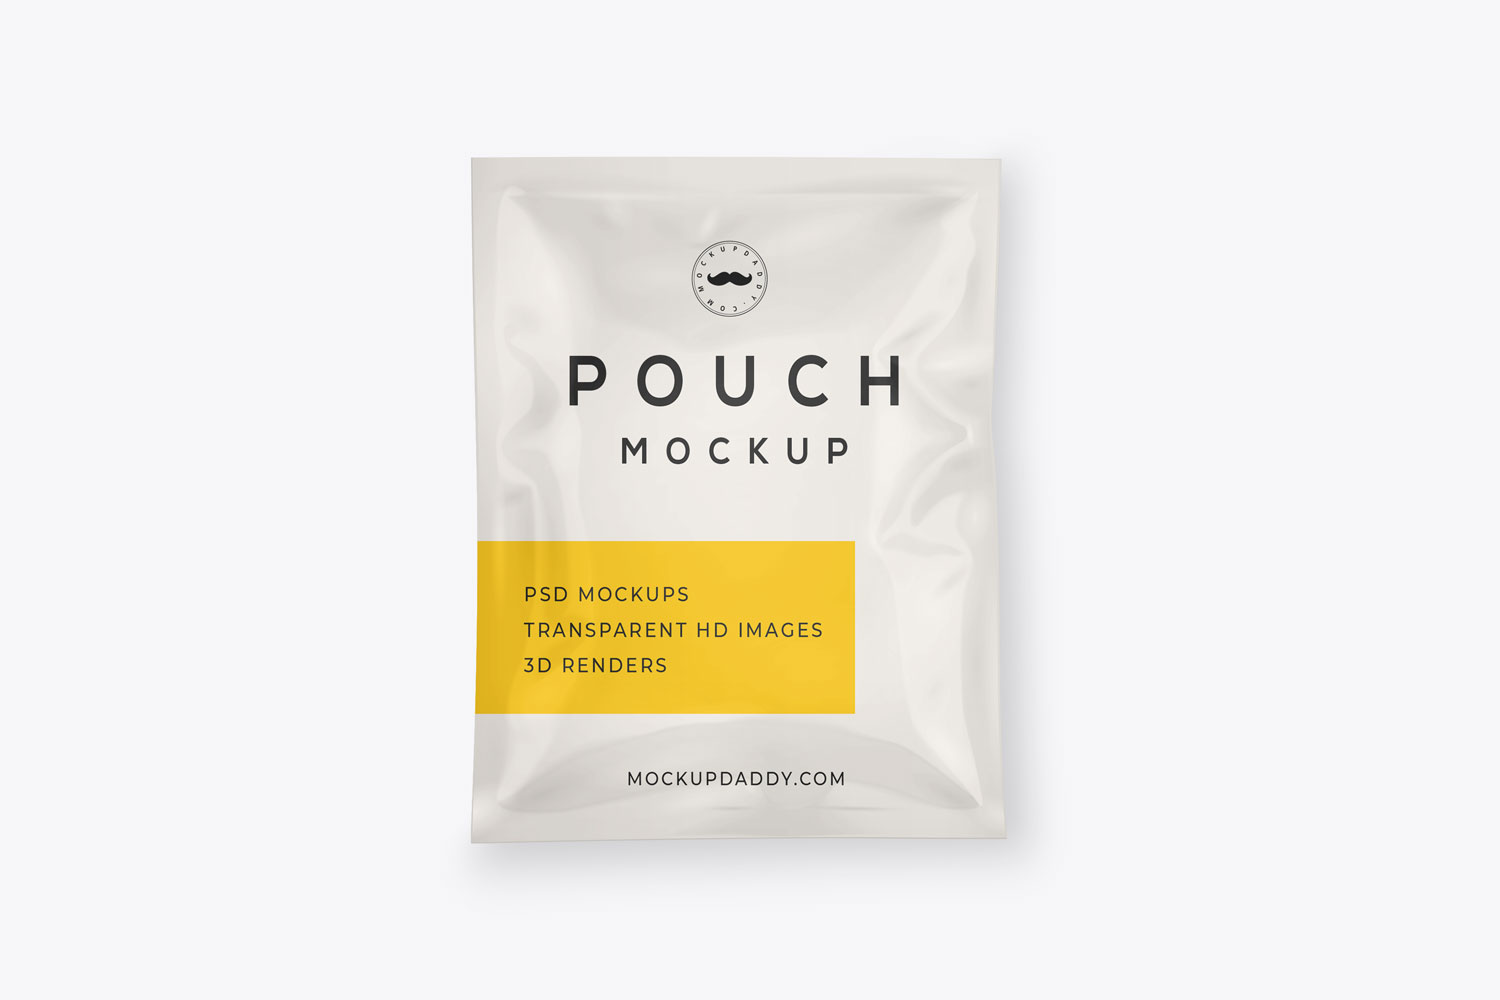 Gold Pouch Mockup